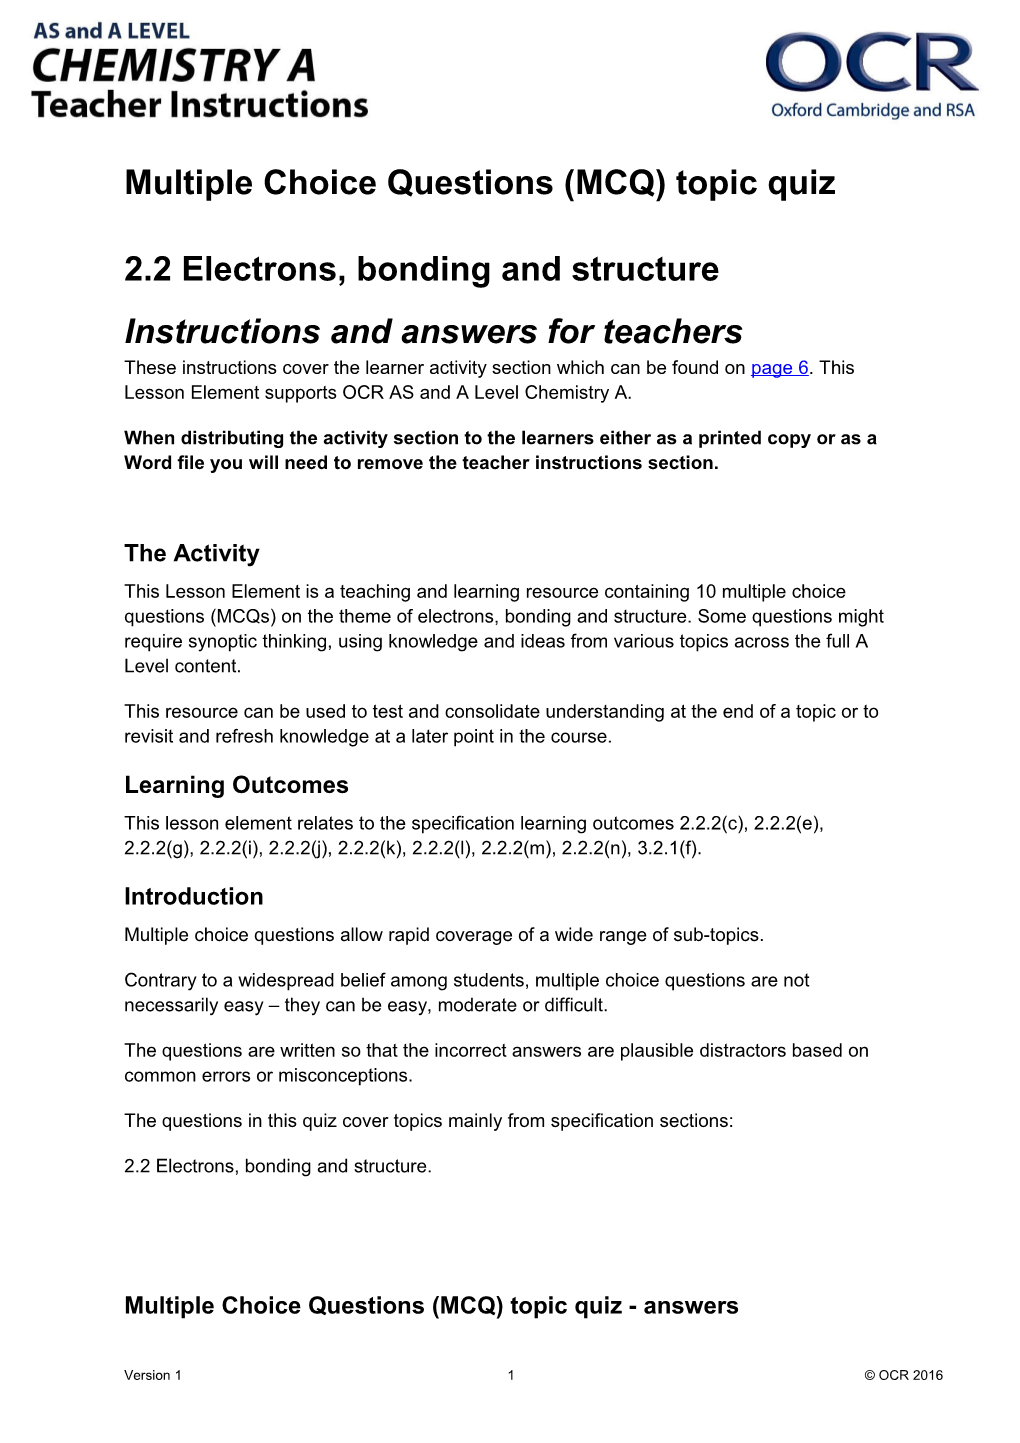 AS And A Level Chemistry A Multiple Choice Practice Tests (Electrons, Bonding And Structures)